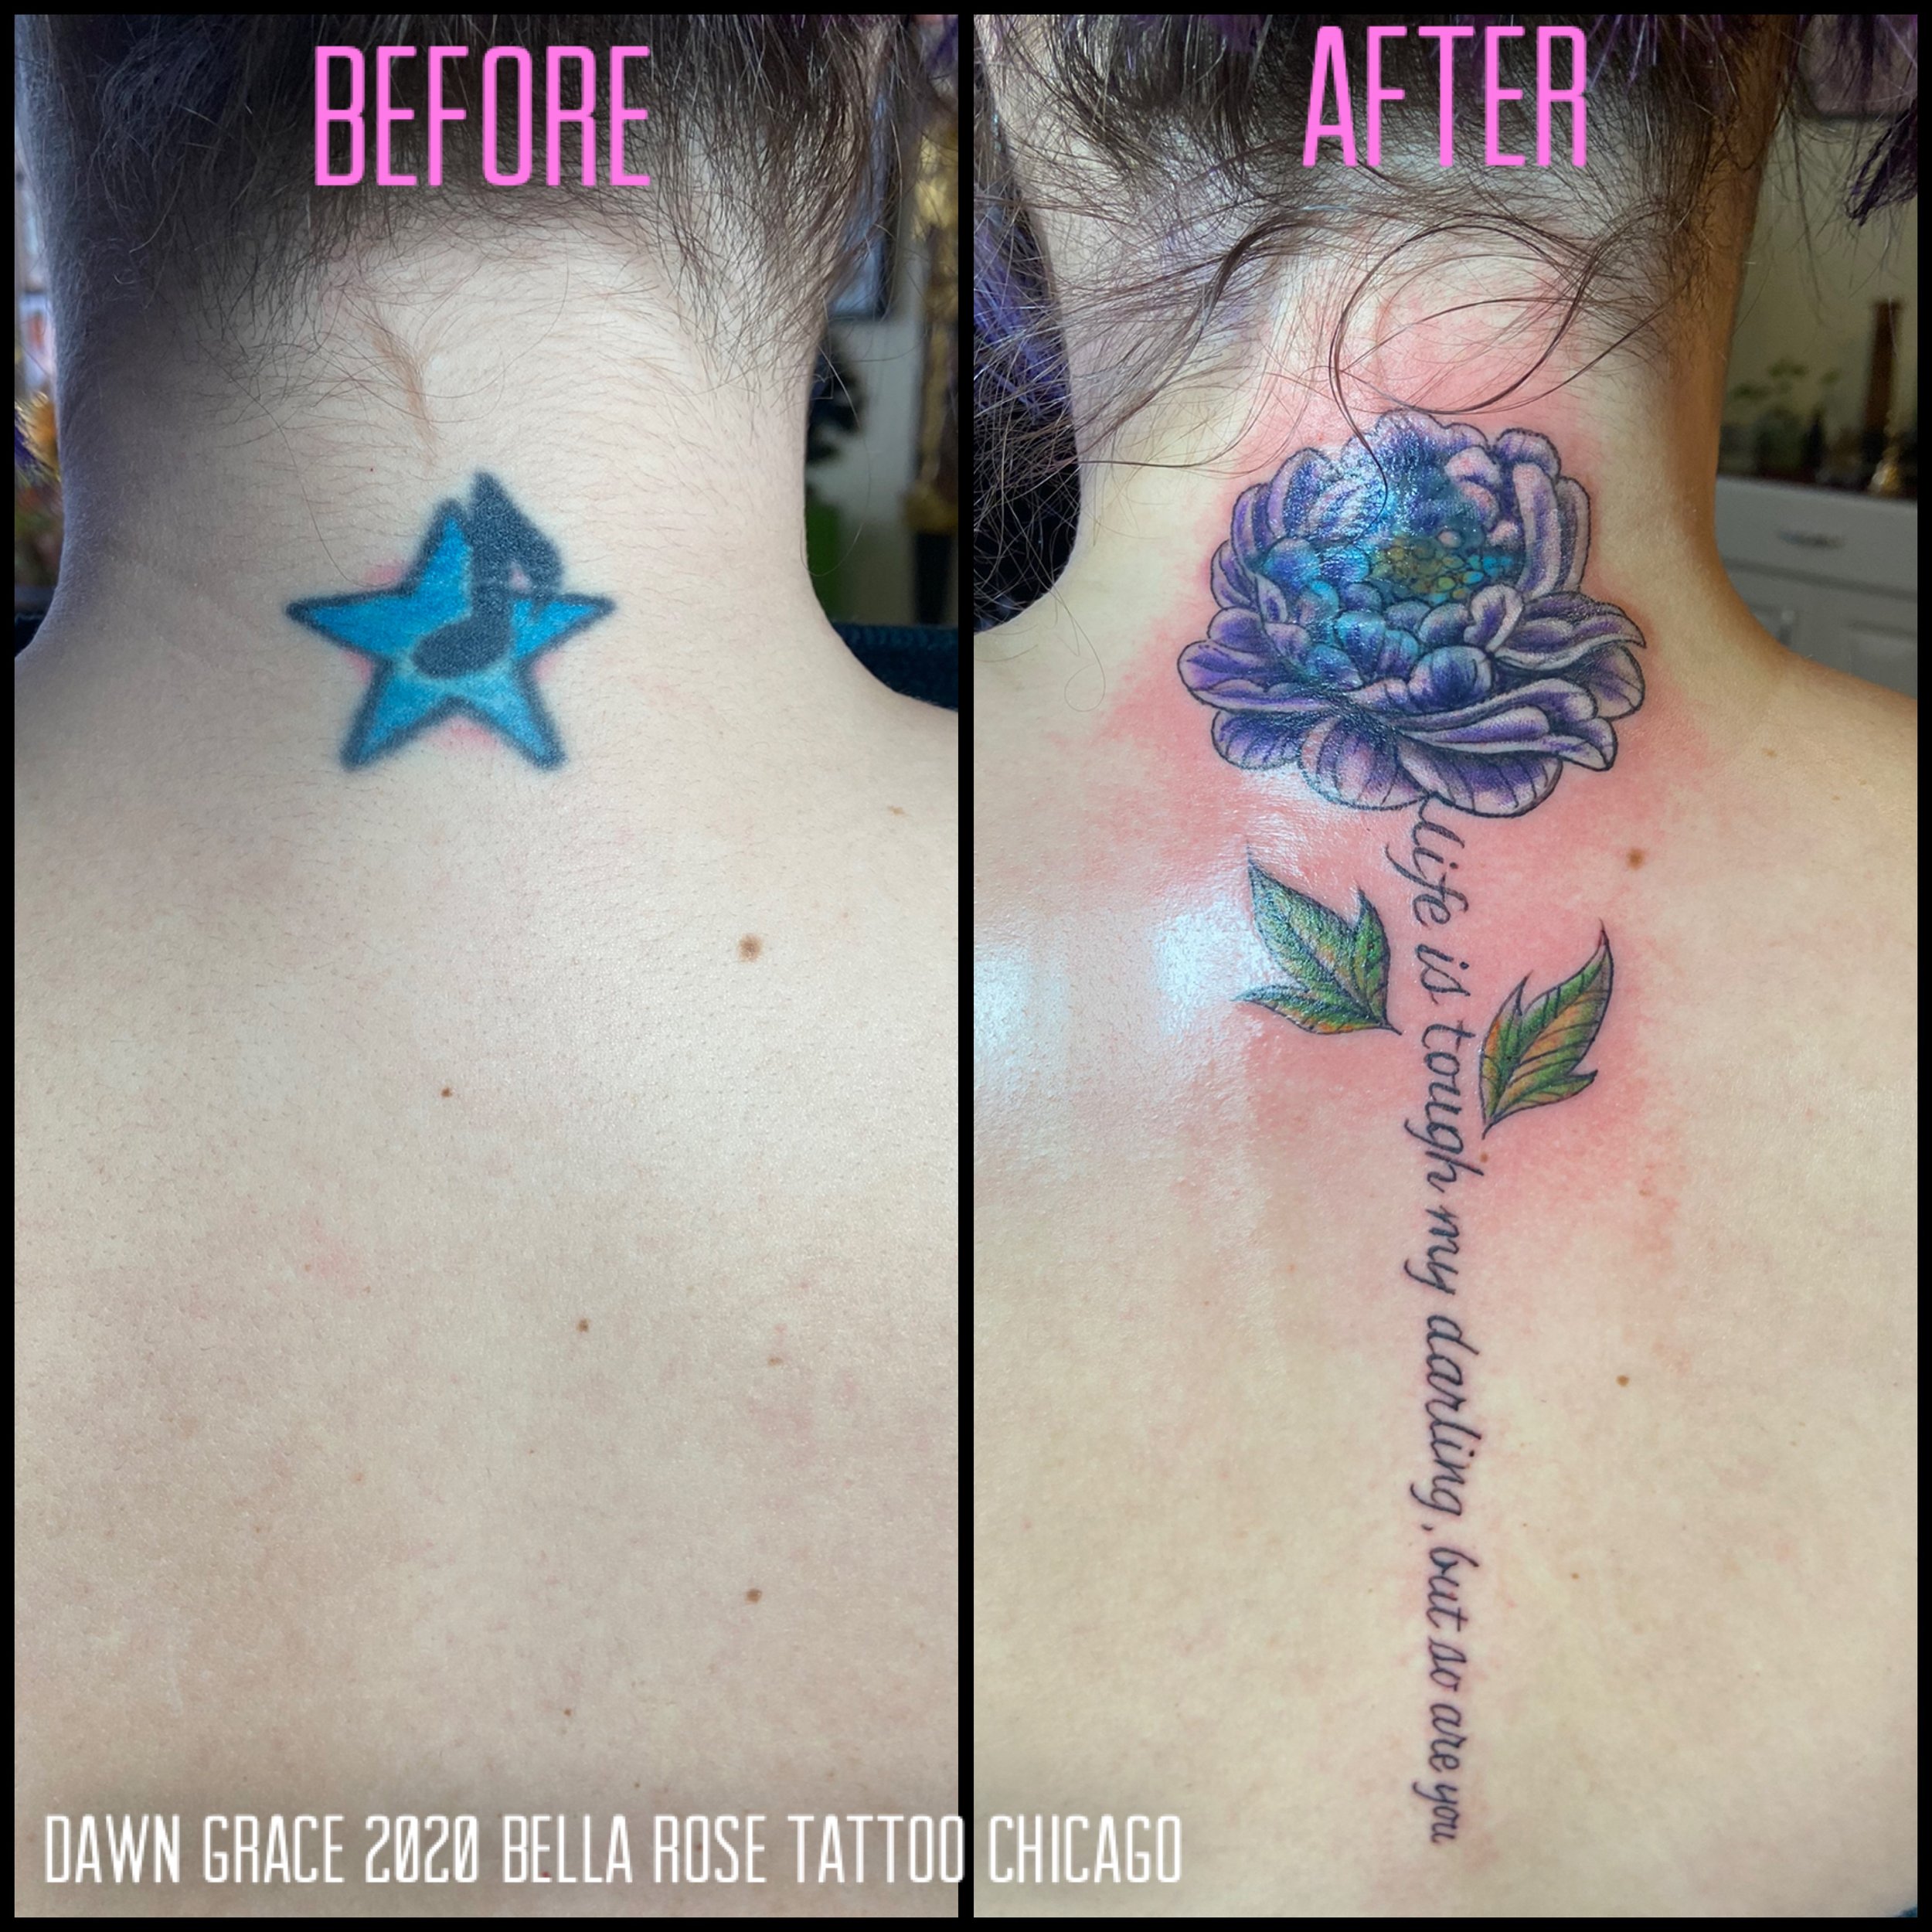 Cover-up tattoos: how they work and what to look